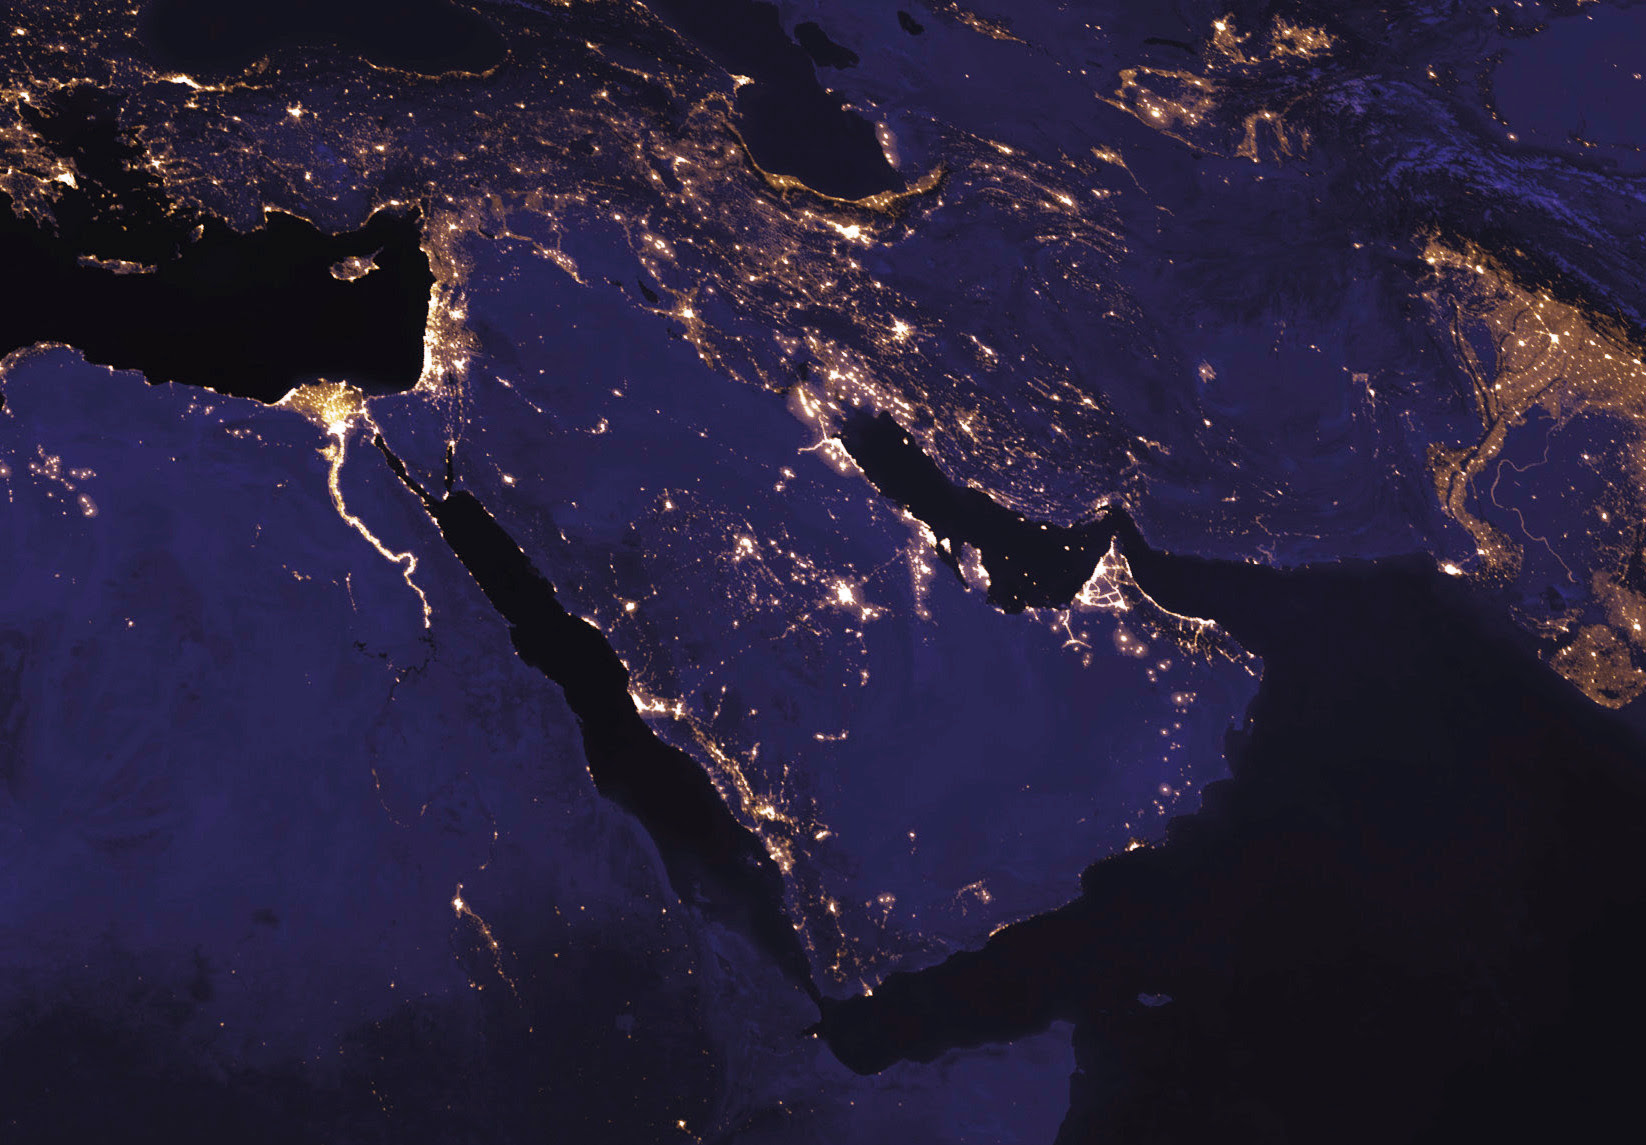 The Middle East at night from space